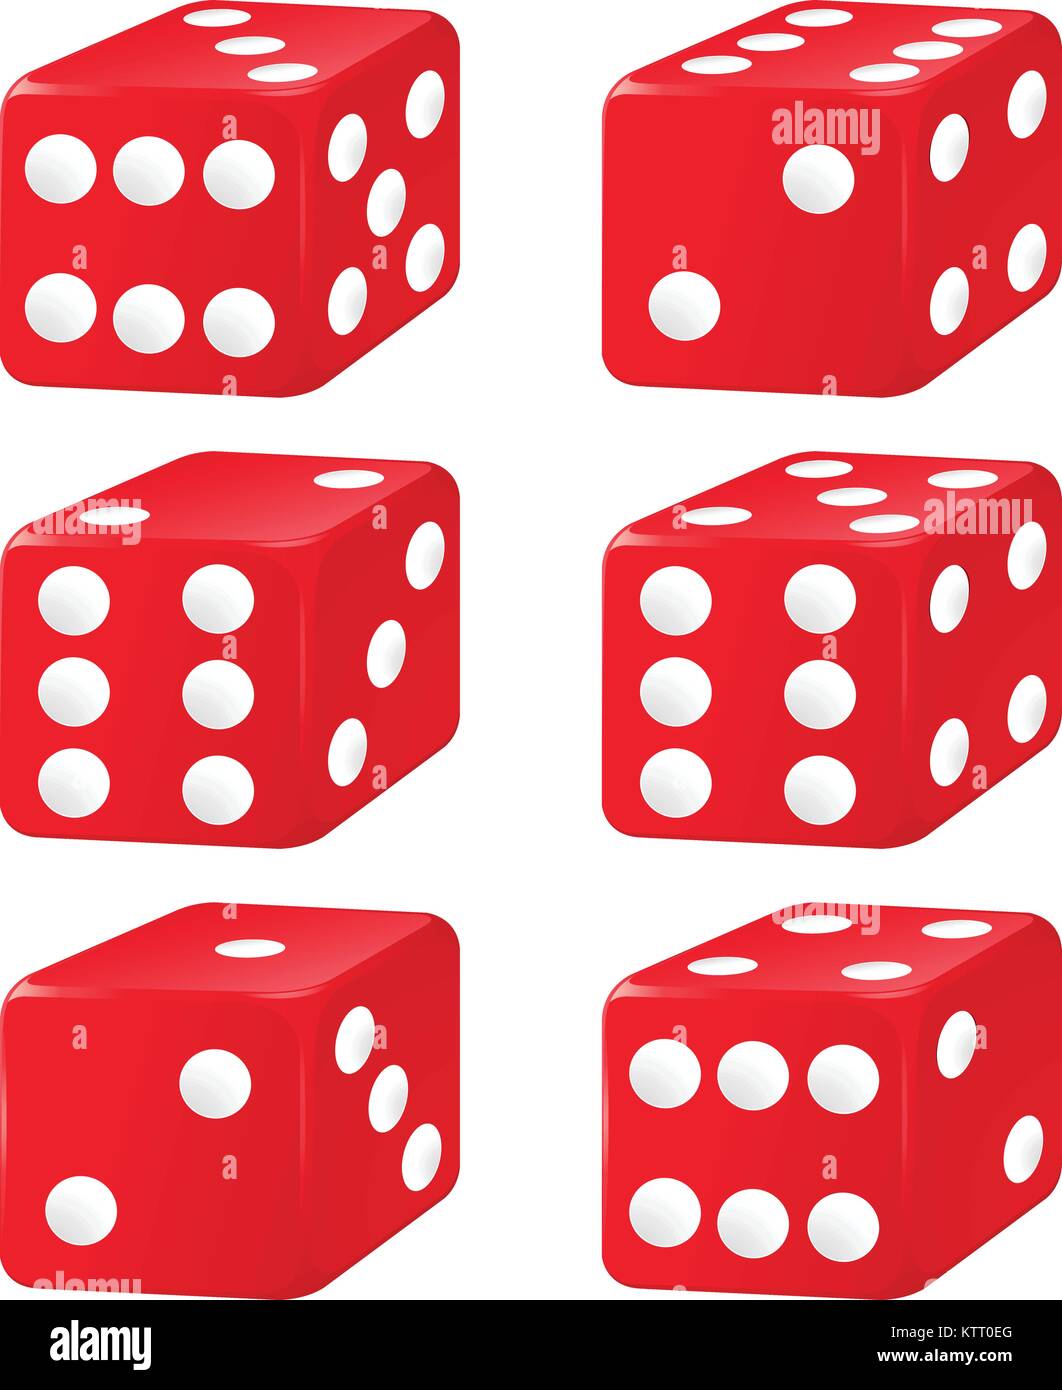 illustration of six dice on a white background Stock Vector